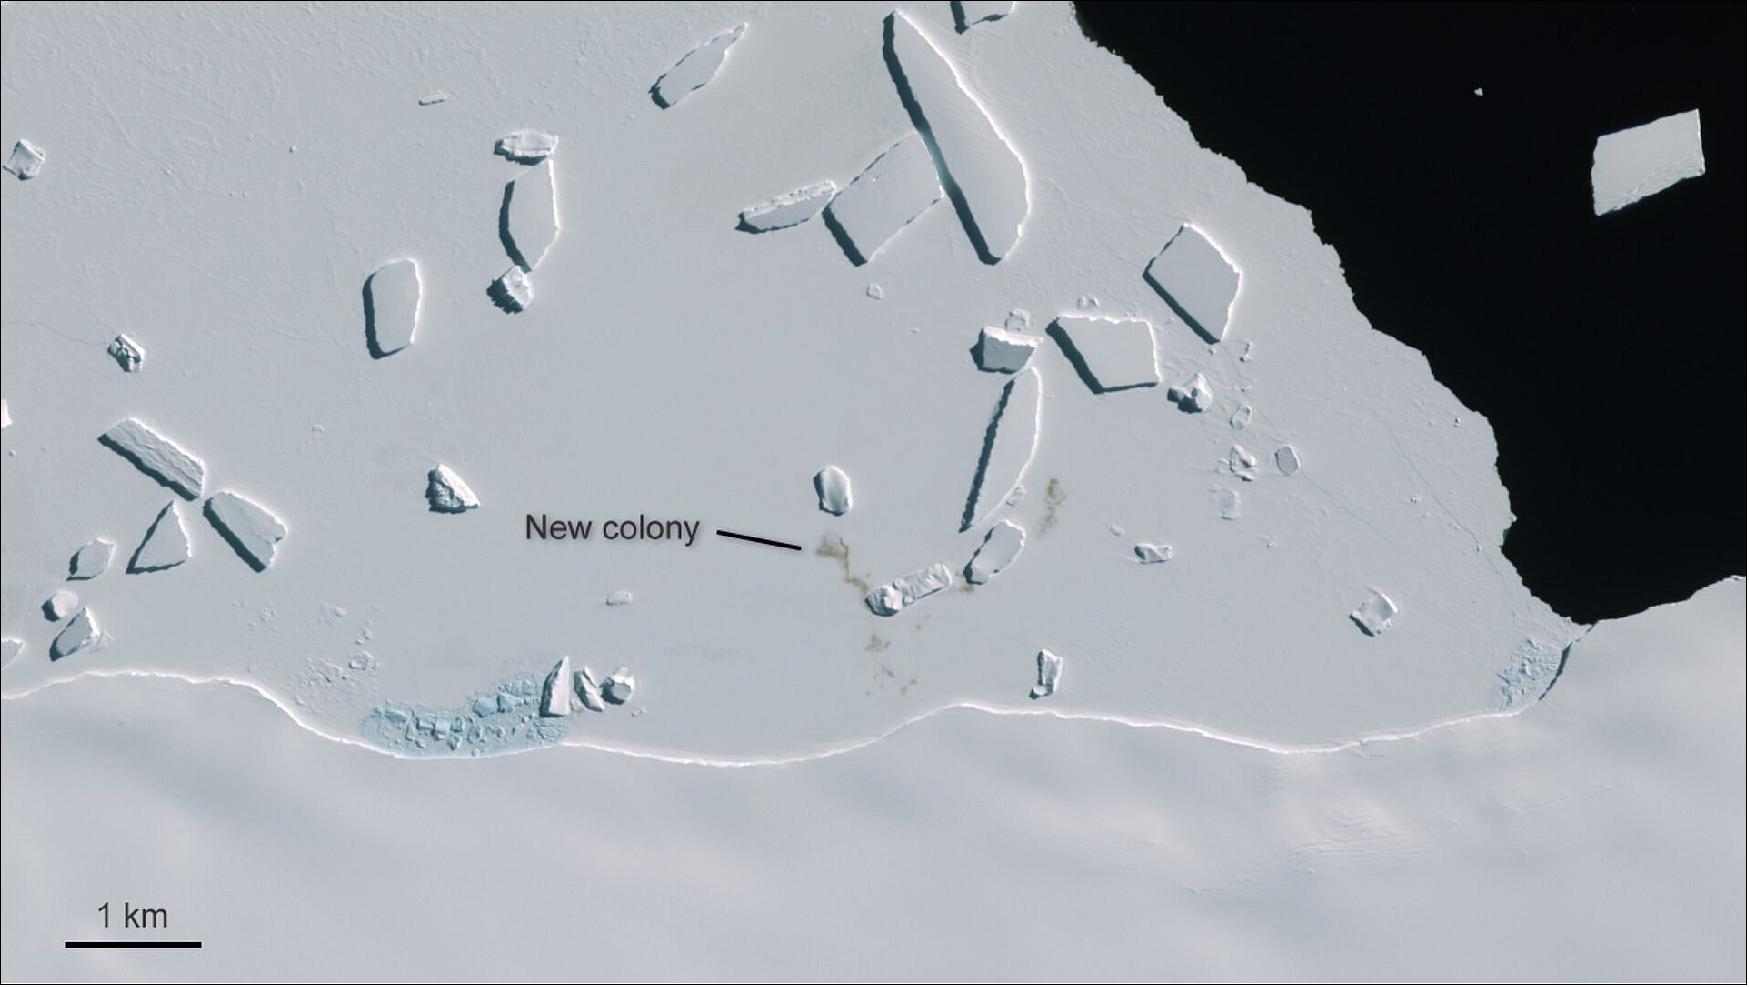 Figure 23: A penguin colony near Cape Gates was captured in this image by the Copernicus Sentinel-2 mission on 7 November 2016. Although penguins are too small to show up in satellite images, giant stains on the ice from penguin droppings – known as guano – are easy to identify. These brownish patches have allowed scientists to locate and track penguin populations across the entire continent (image credit: ESA, the images contains modified Copernicus Sentinel data (2016), processed by ESA, CC BY-SA 3.0 IGO)